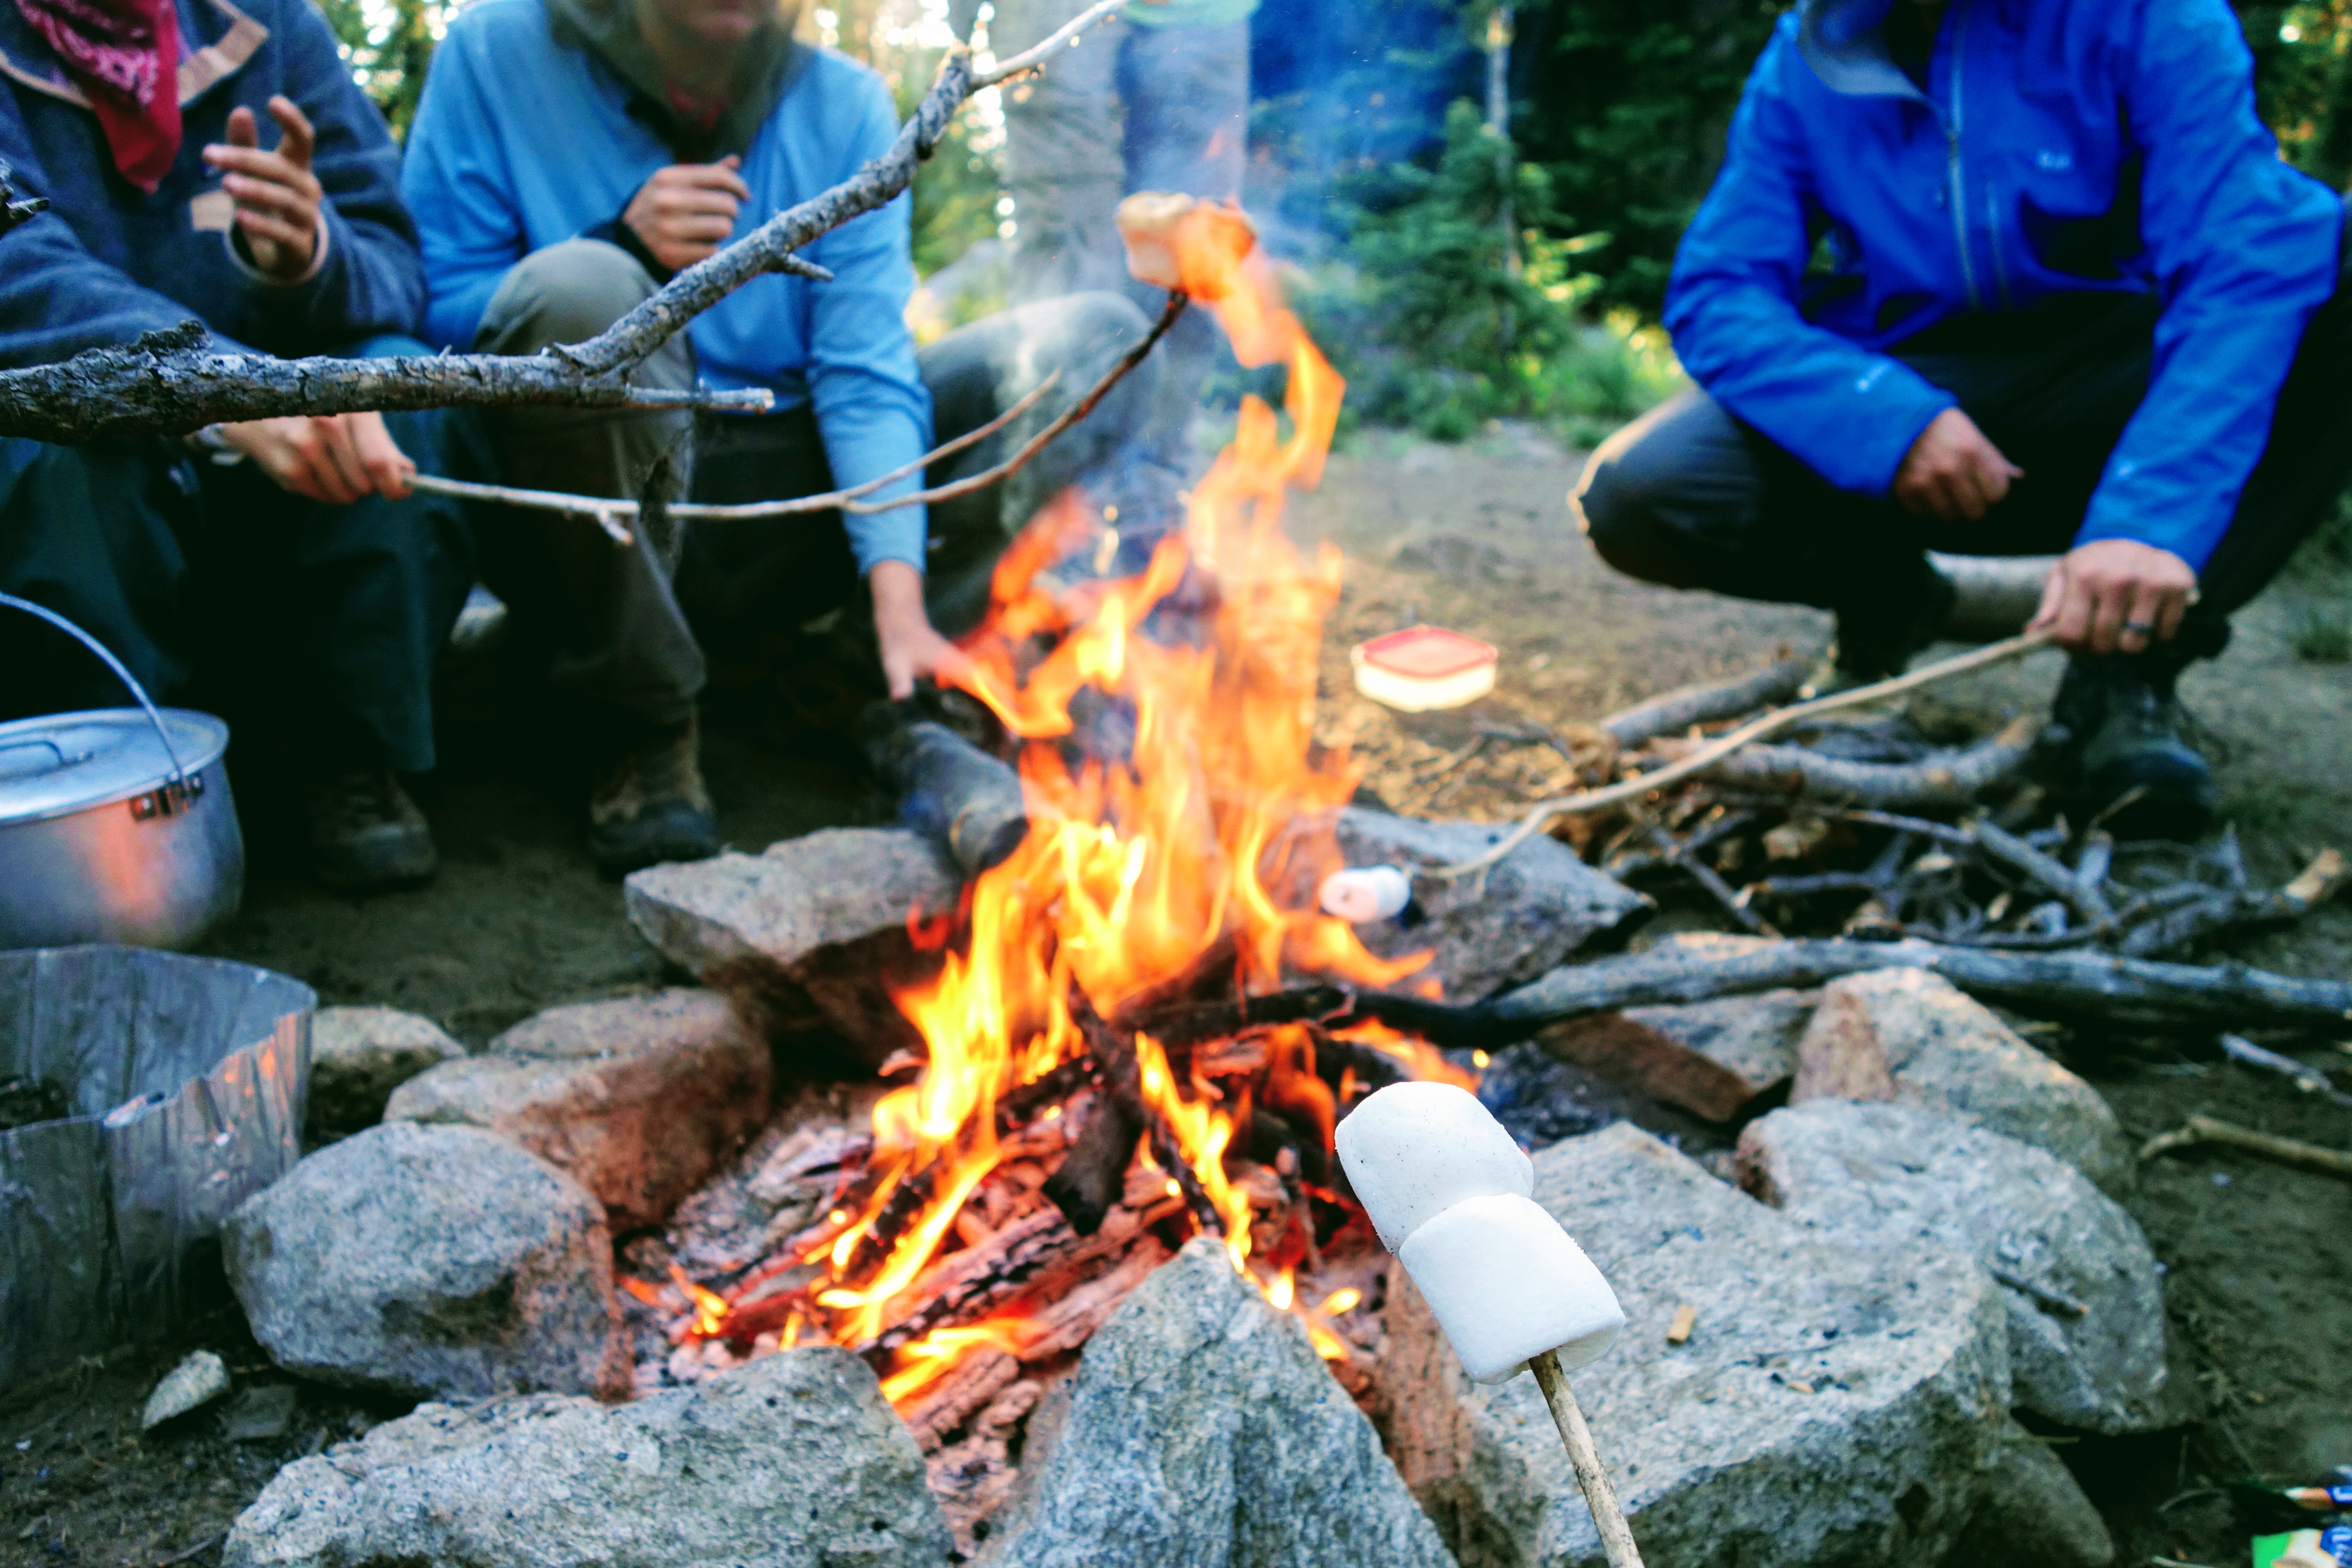 A group of people sit around a fire while roasting marshmallows.